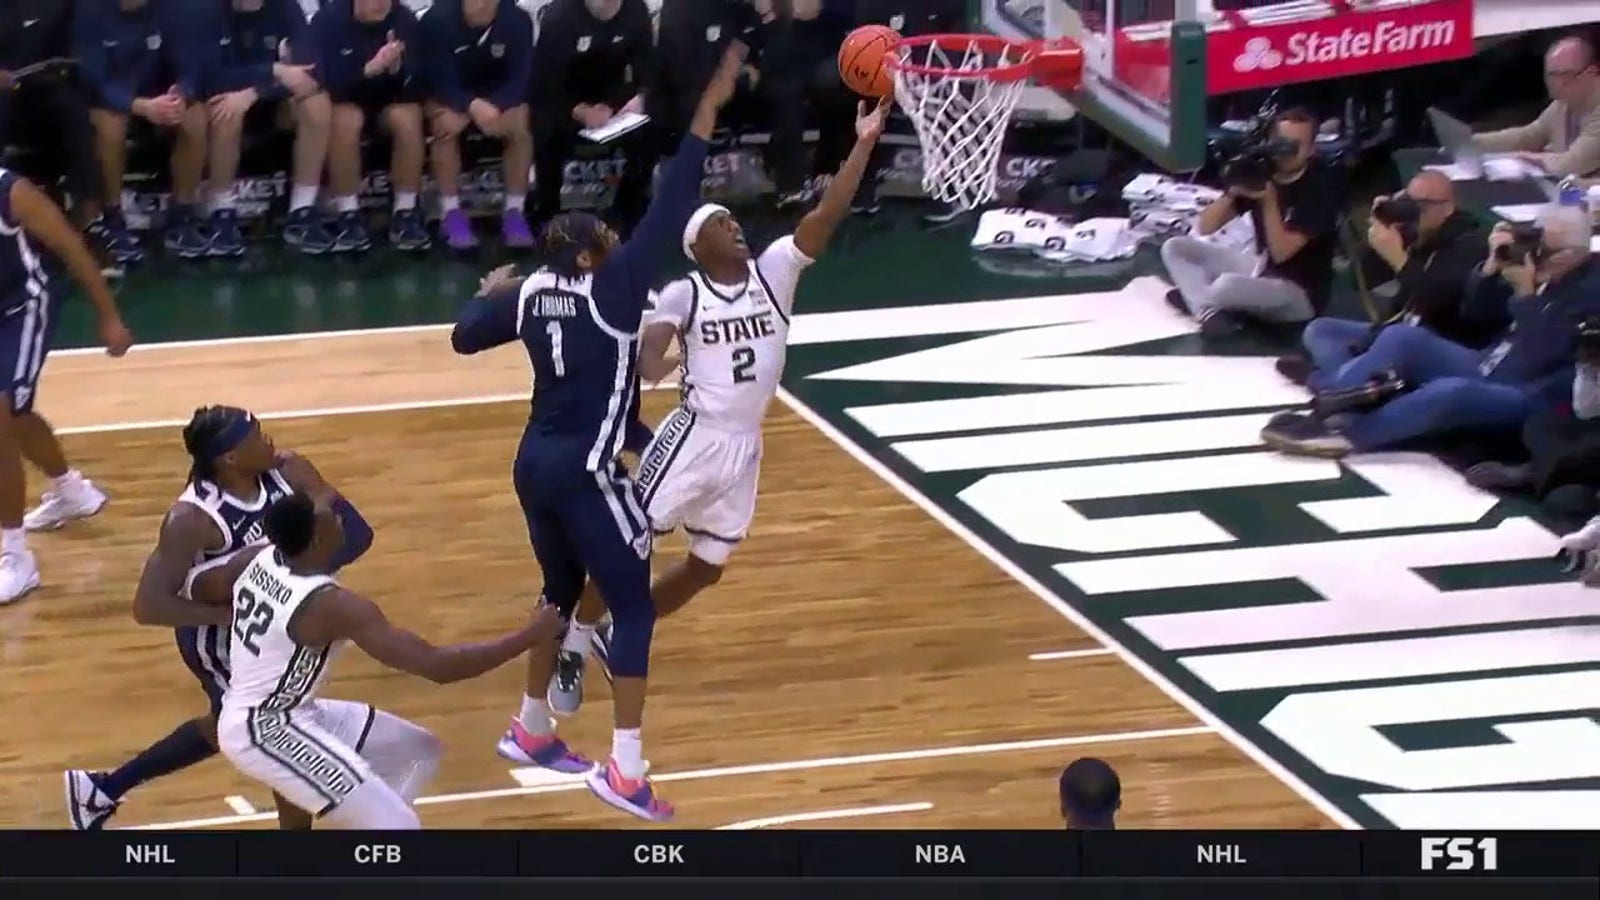 Michigan State's Tyson Walker shows off wild crossover and finishes strong to extend lead over Butler